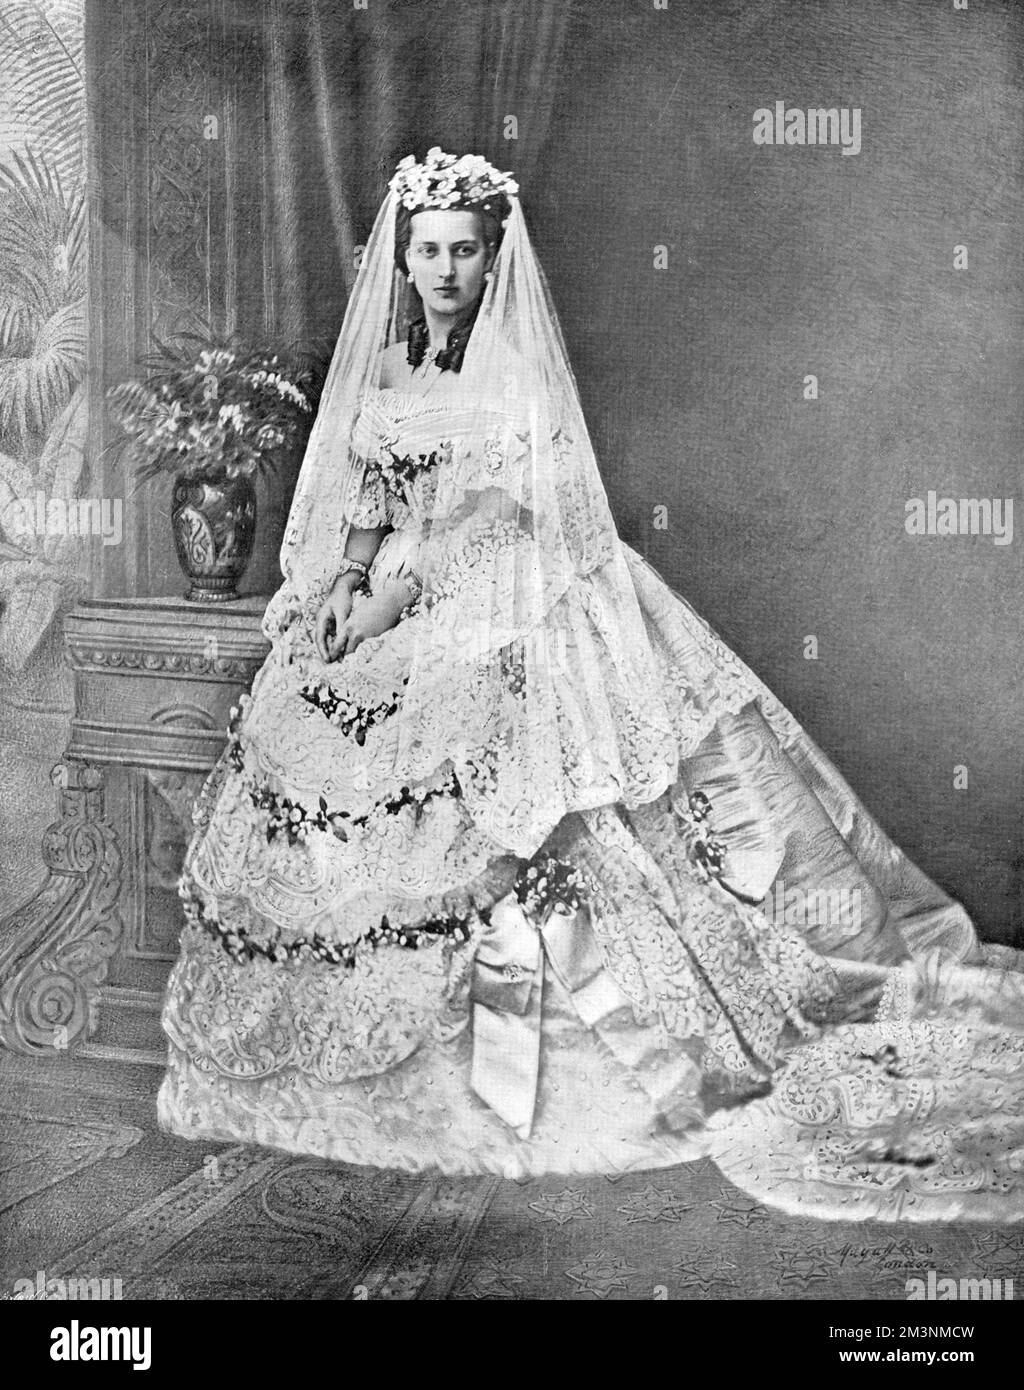 Queen Alexandra, formerly Princess Alexandra of Denmark (1844 - 1925), and then Princess of Wales, consort of King Edward VII pictured in her wedding gown for her marriage to Albert Edward, Prince of Wales on 10 March 1863 at St. George's Chapel, Windsor.     Date: 1863 Stock Photo